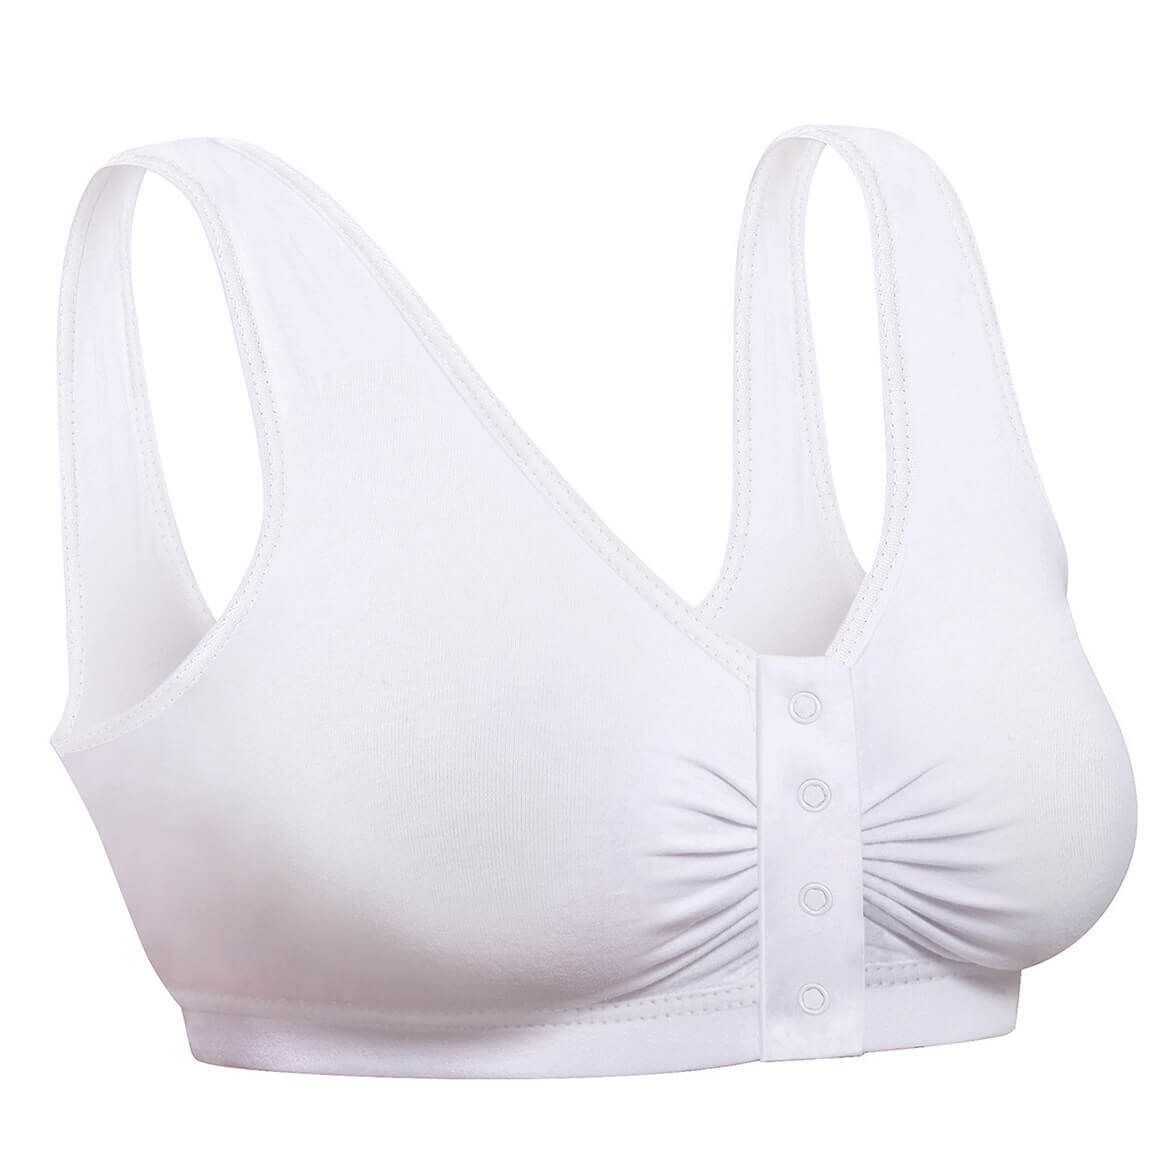 Front closure bras • Compare & find best prices today »